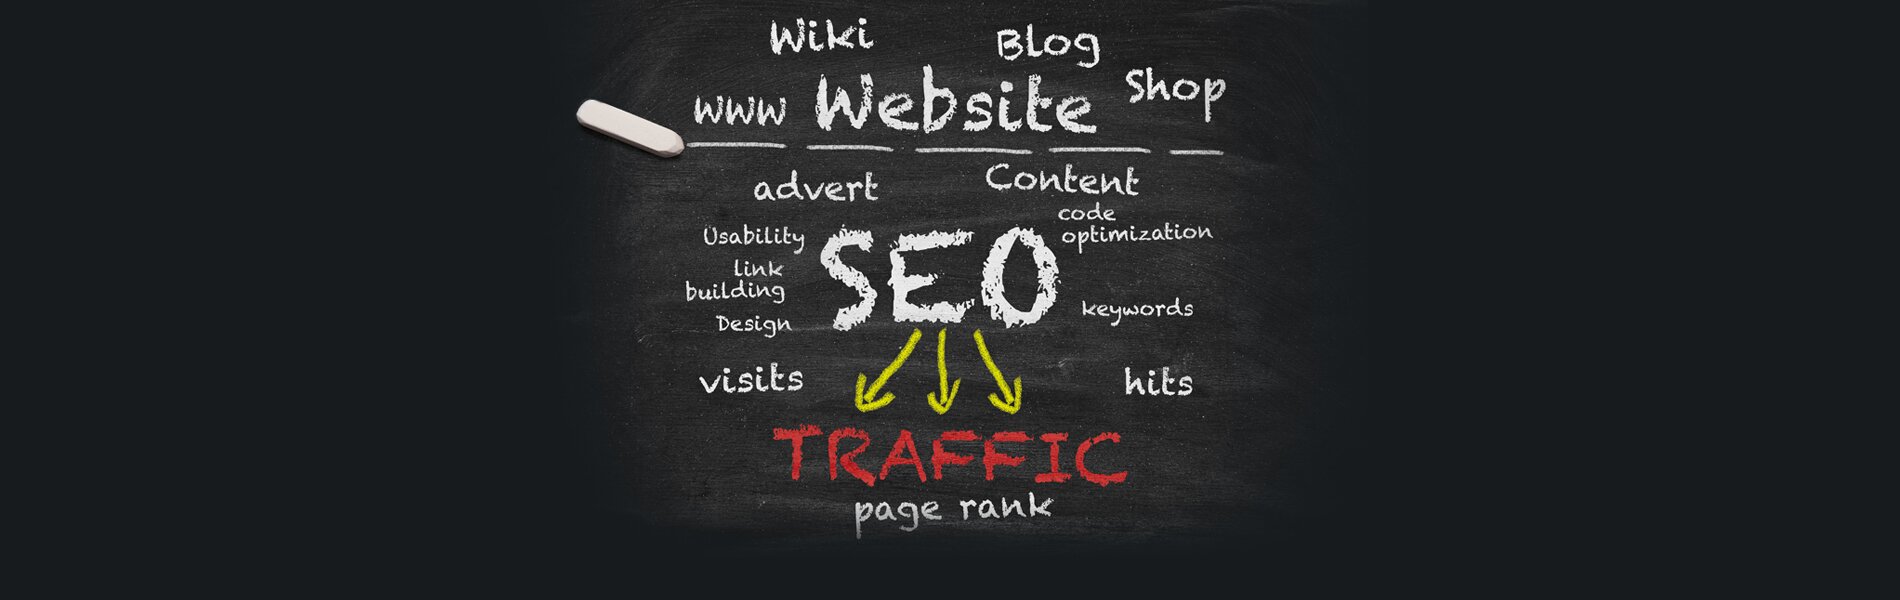 How to Benefit from Search Engine Search Results